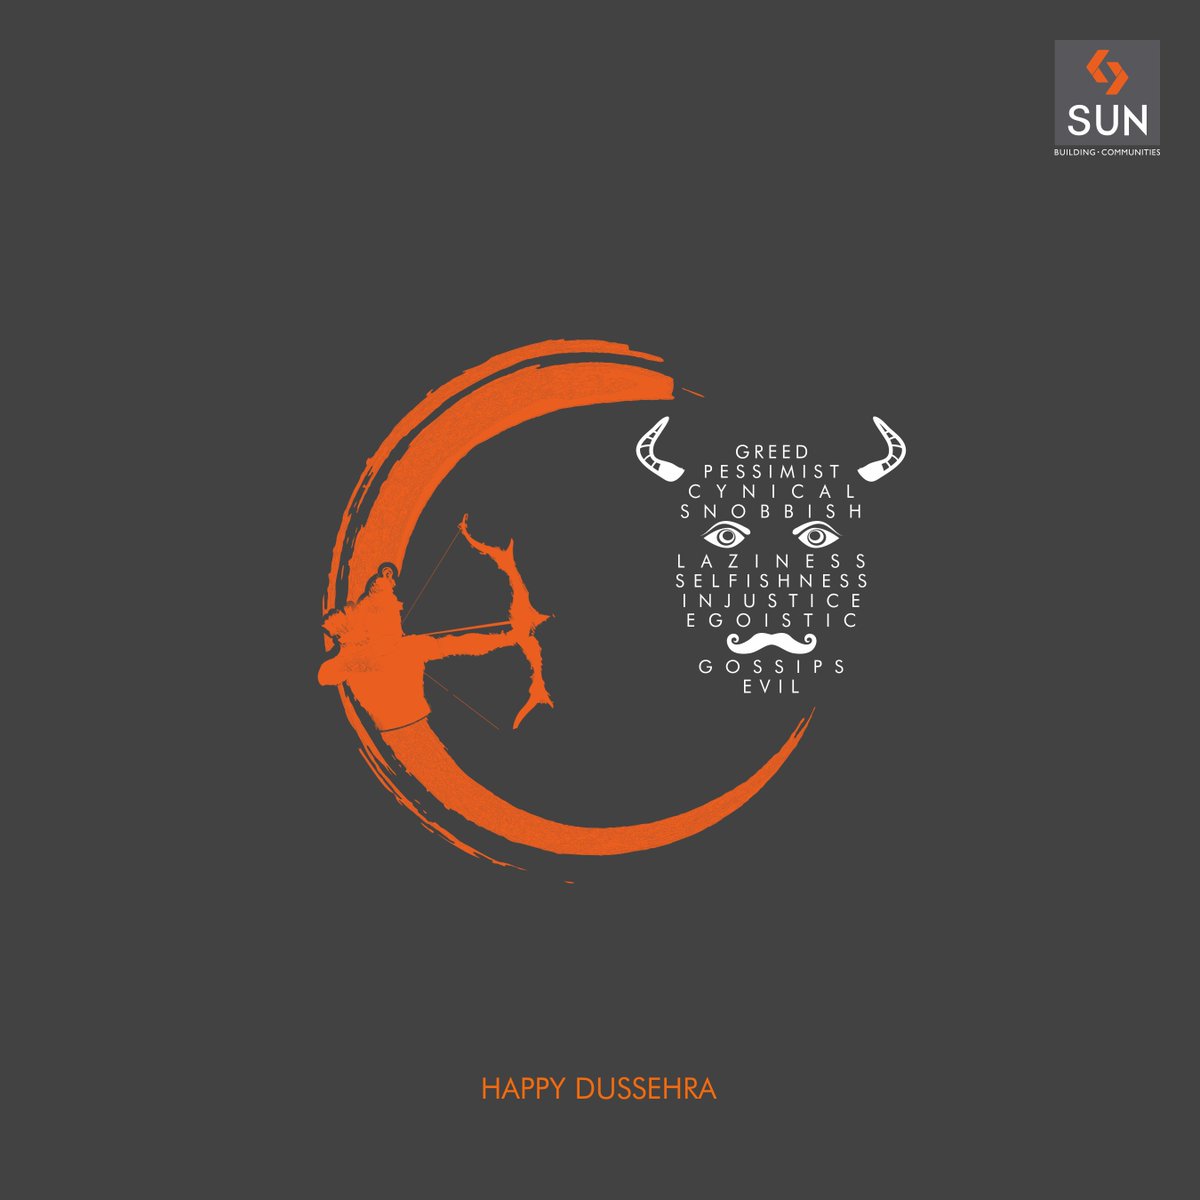 Let's #celebrate the #victory of #good over #evil. 
#SunBuilders wishes you all a very #HappyDussehra https://t.co/6YqlQggBEE